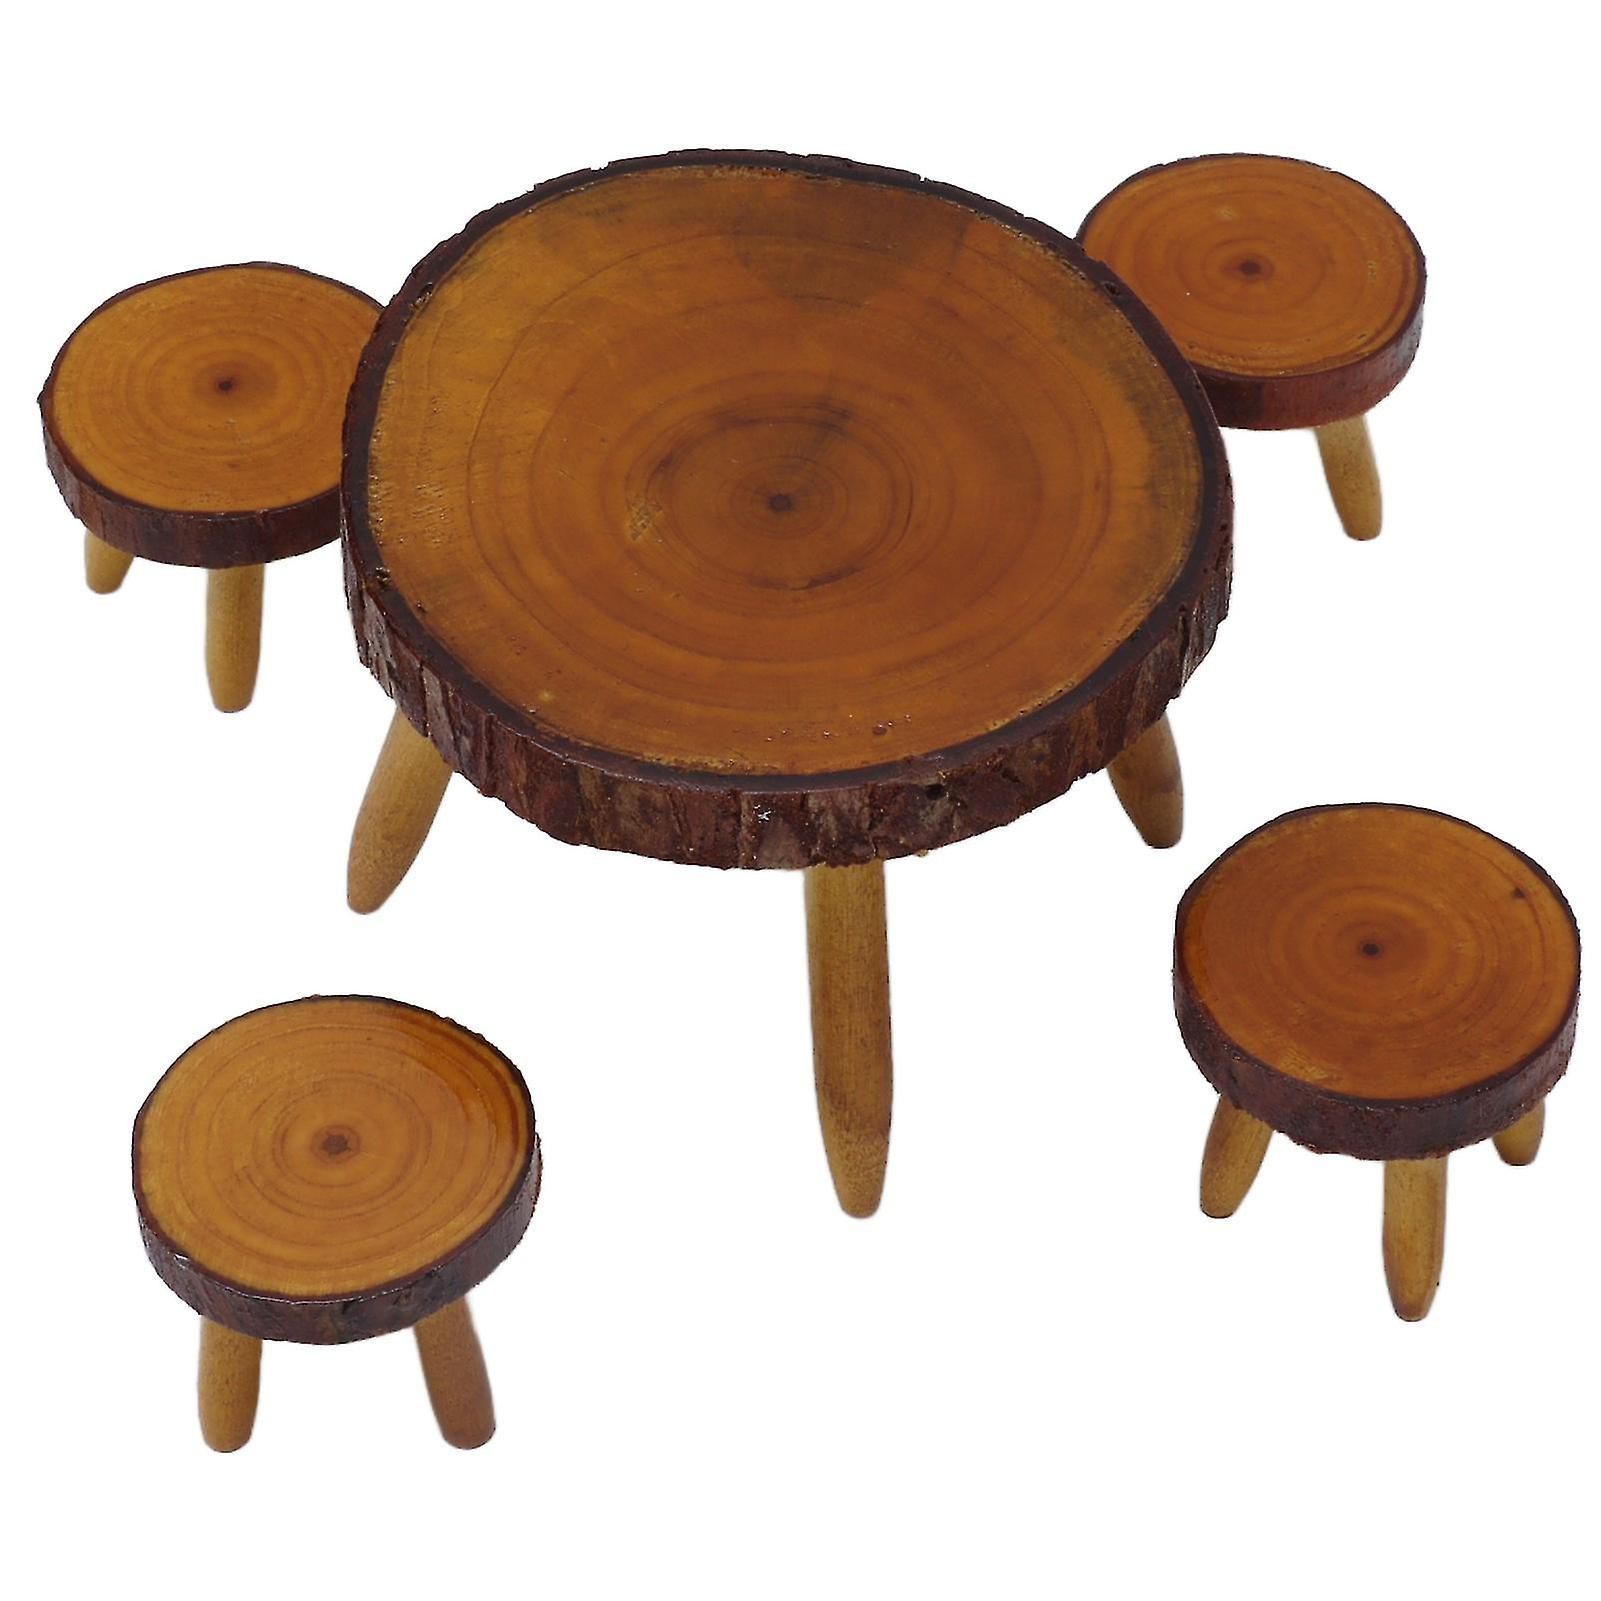 Dollhouse Wood Round Dining Table Chair Mini Miniature Dollhouse Furniture Furnishings Accessories